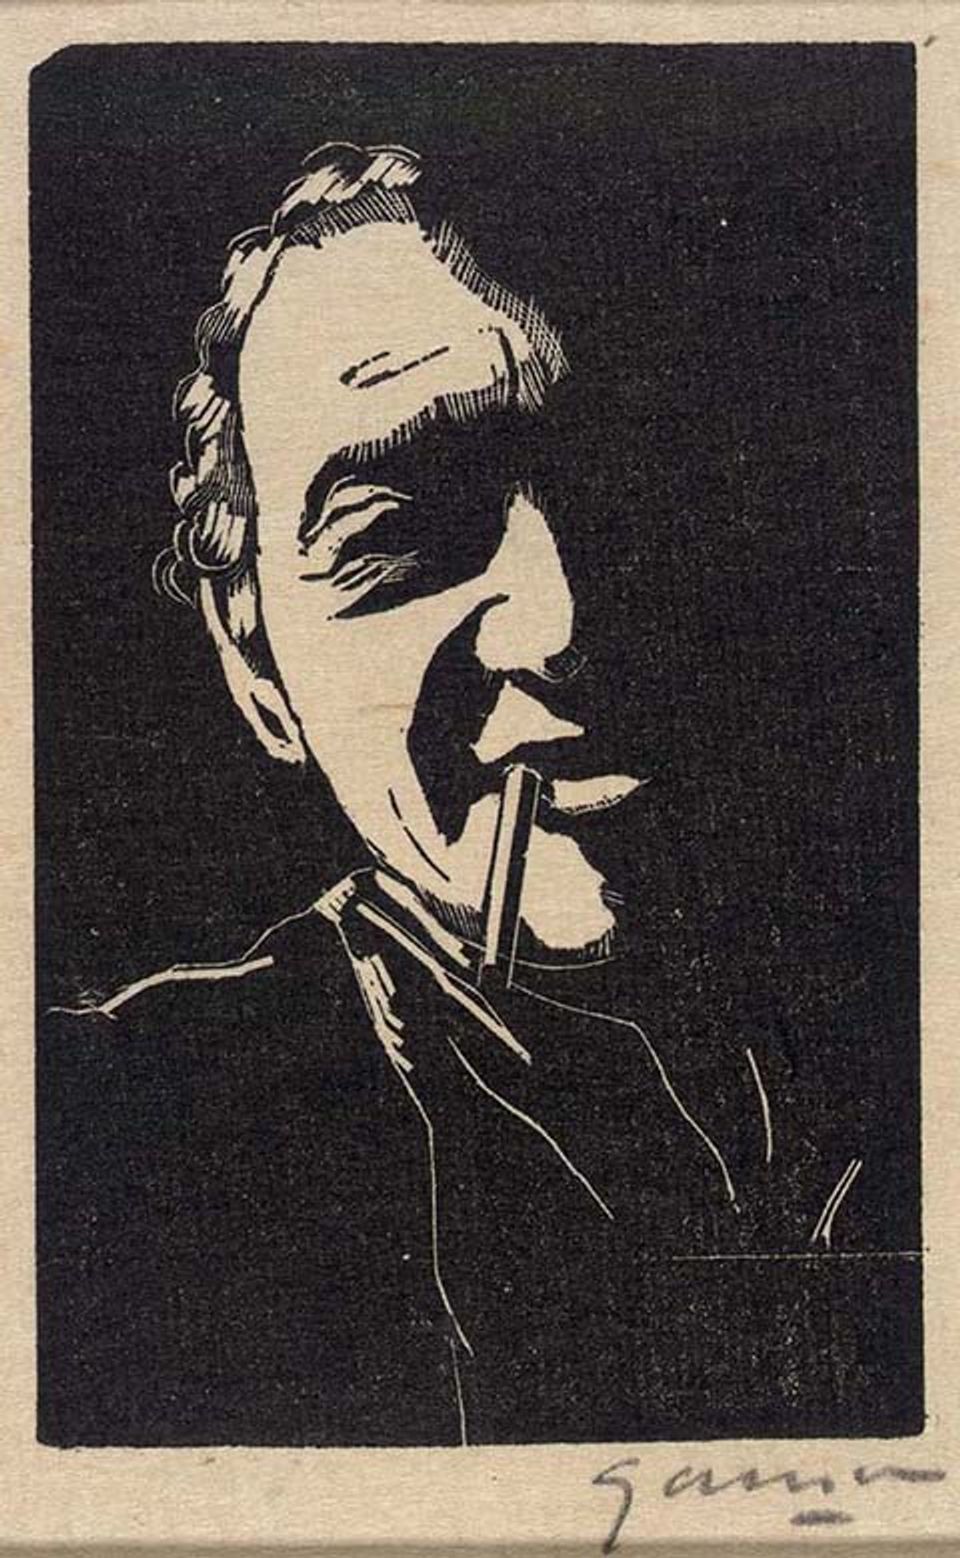 A woodcut painting of a man with a cigarette in his mouth.